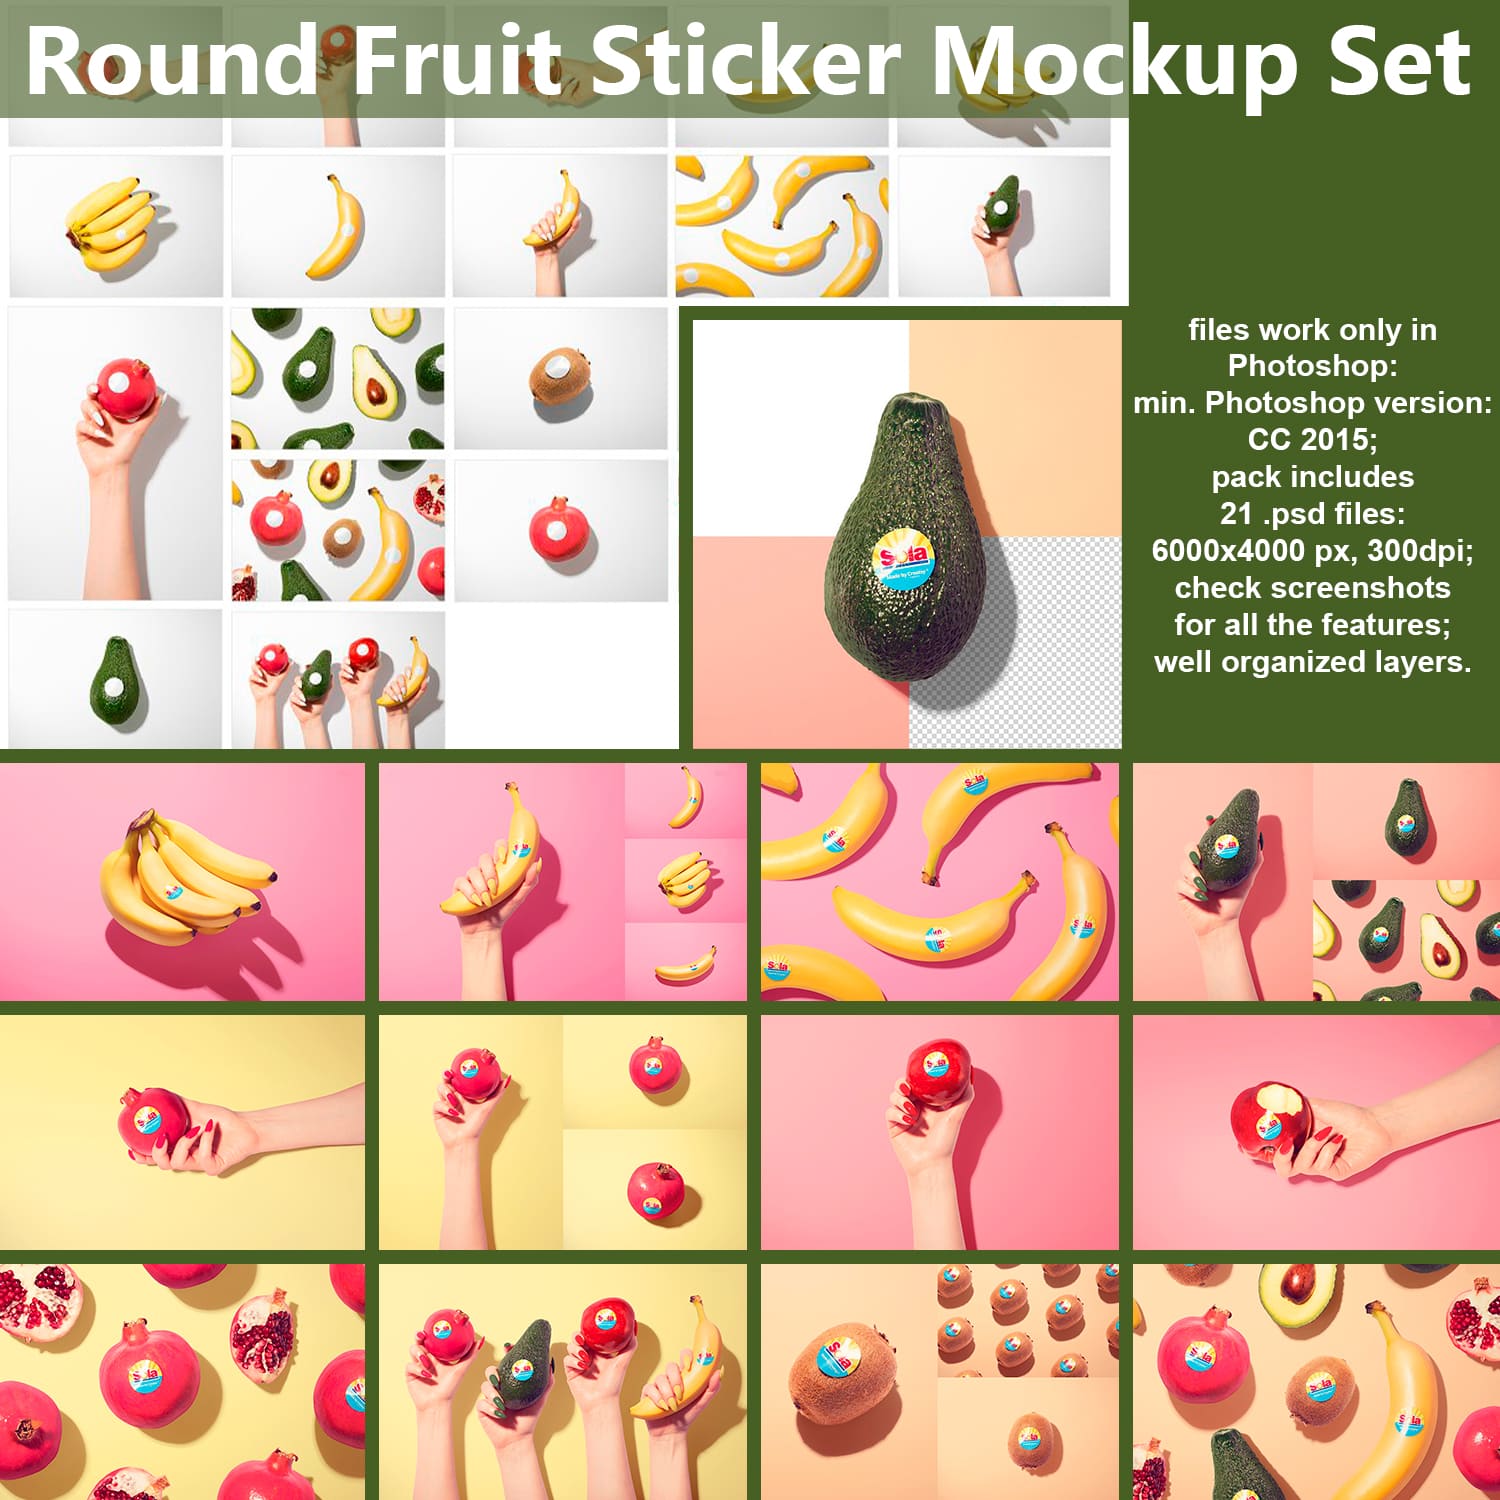 Collection of fruits images with adorable round stickers.